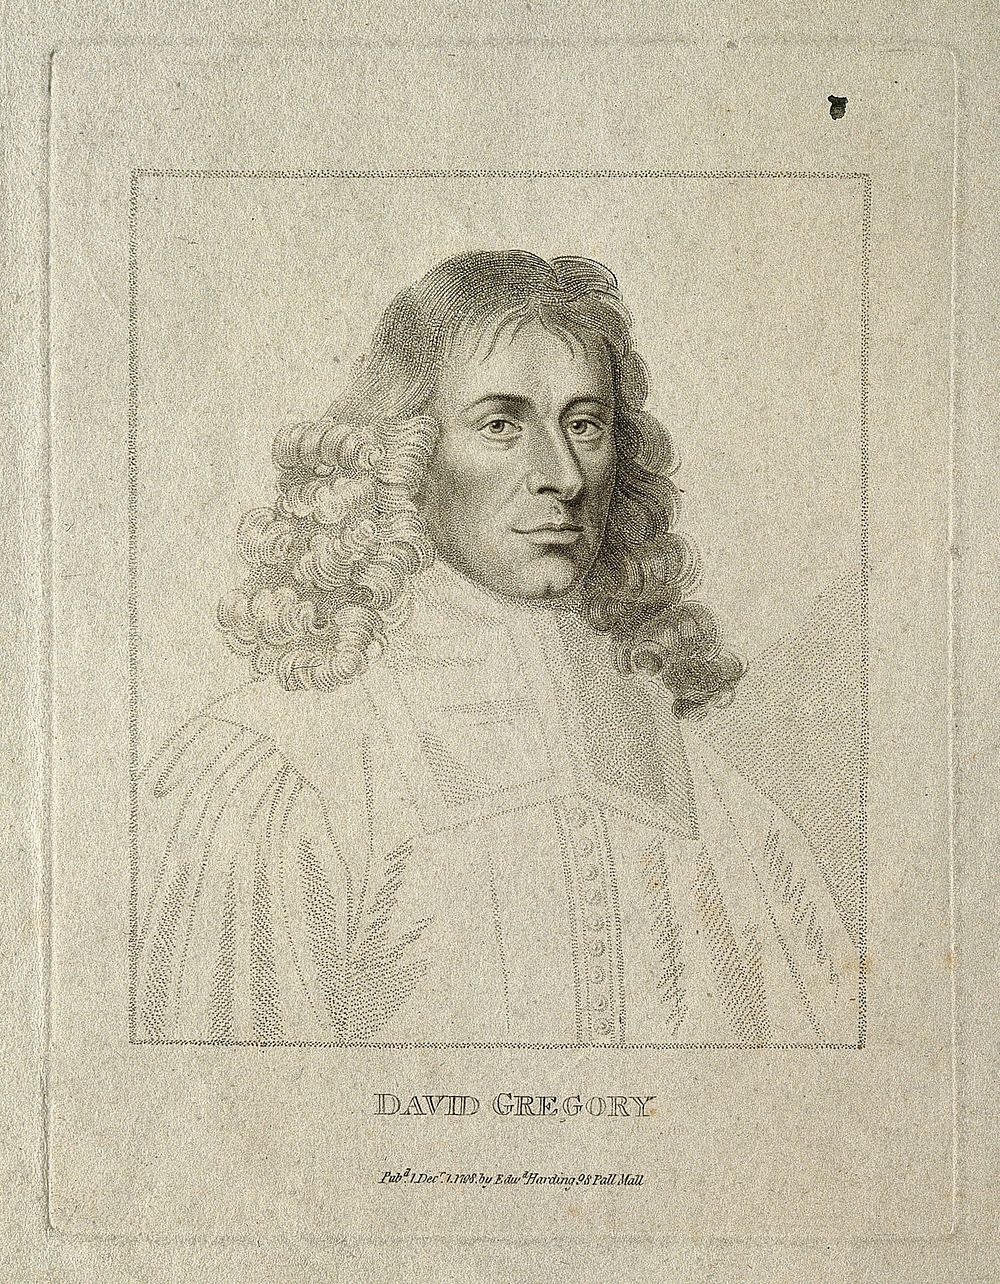 David Gregory. Stipple engraving by E. Harding, 1798.